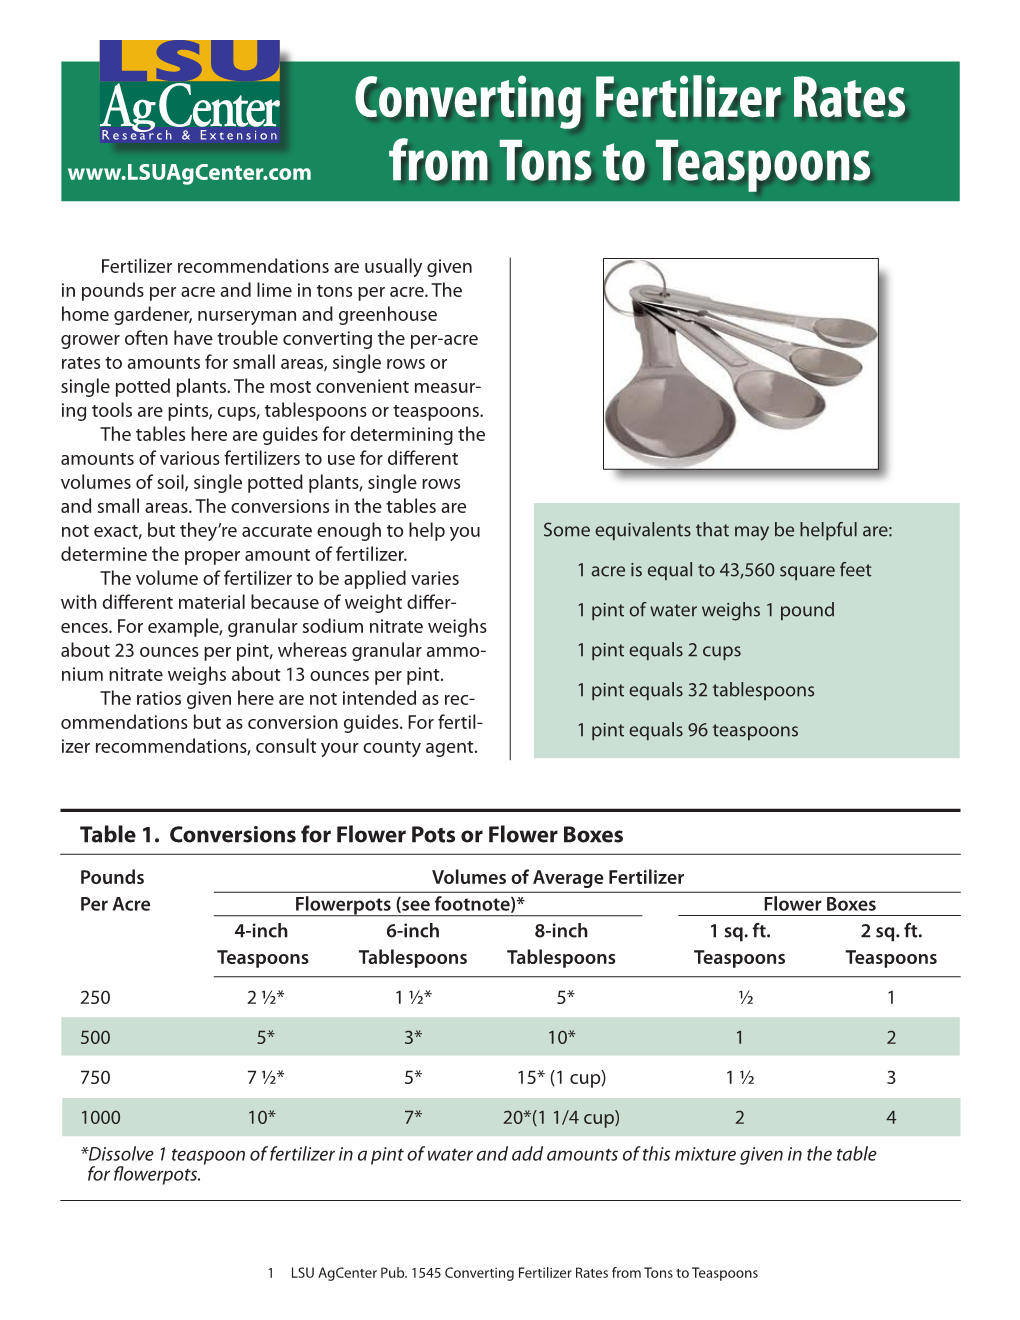 Converting Fertilizer Rates from Tons to Teaspoons Table 2